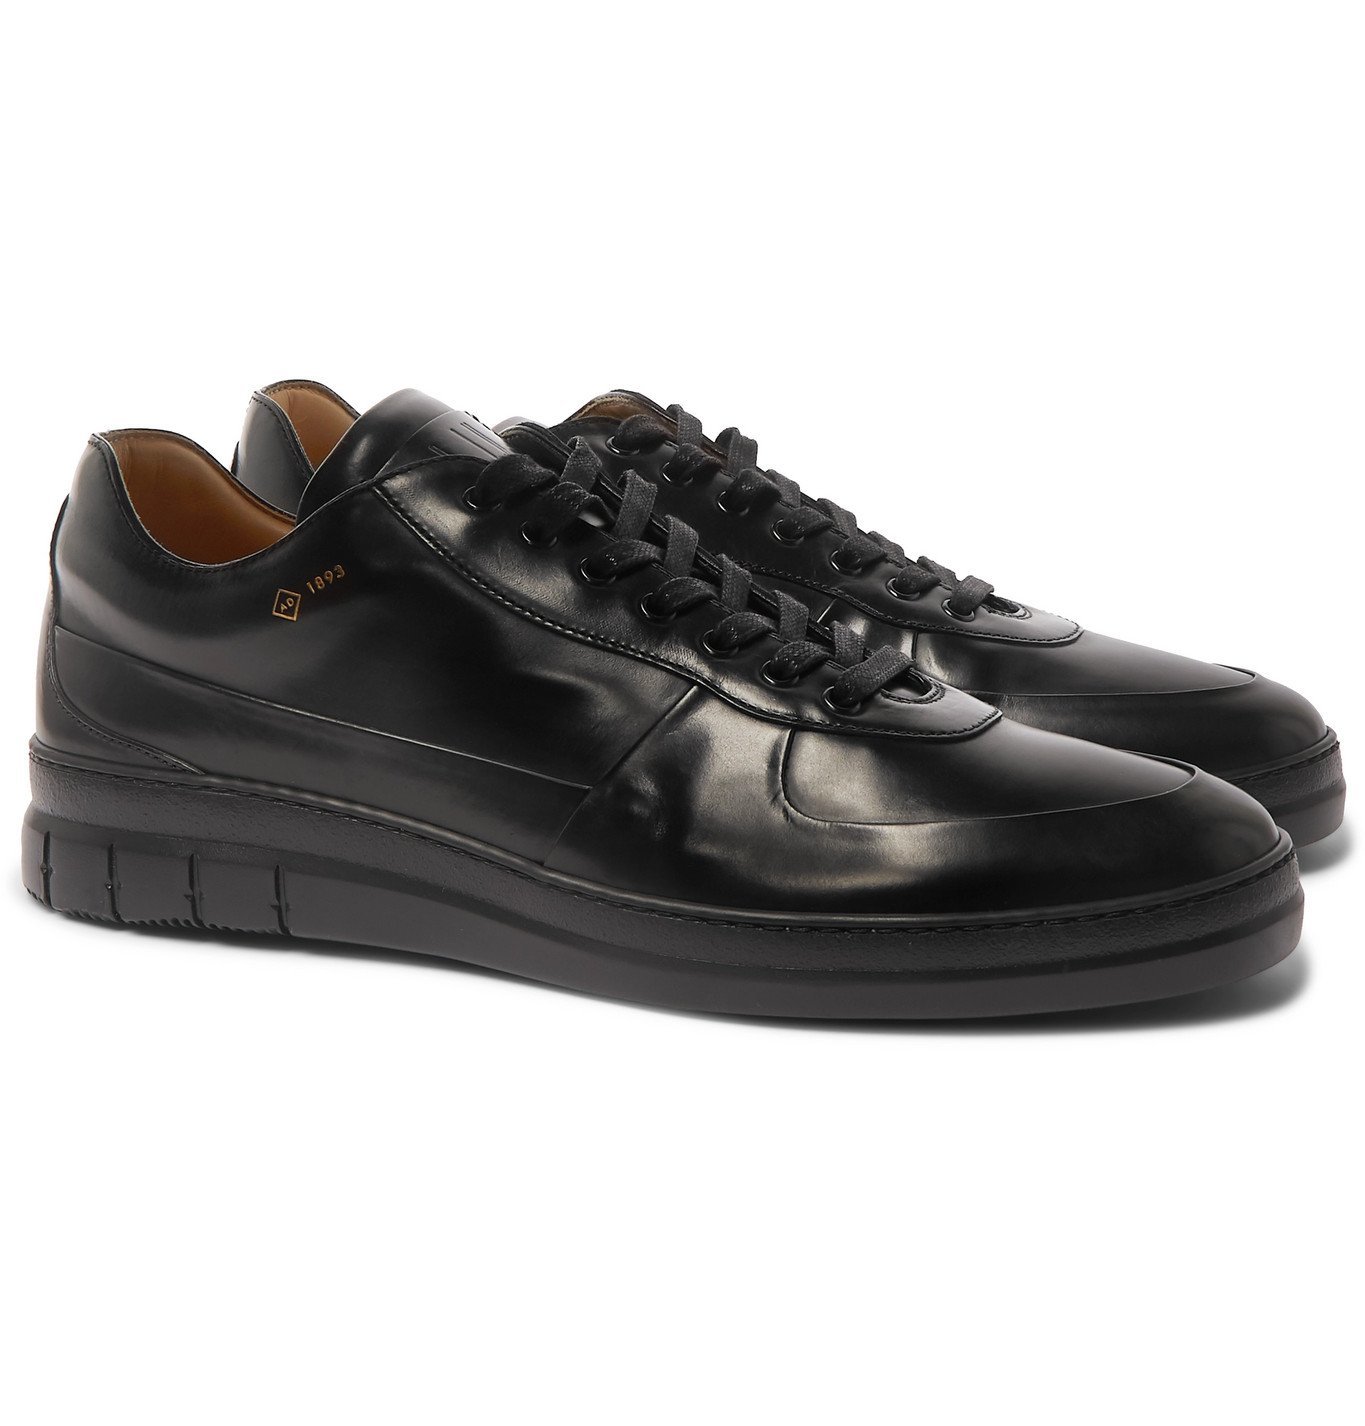 Dunhill - Duke Polished-Leather Sneakers - Black Dunhill